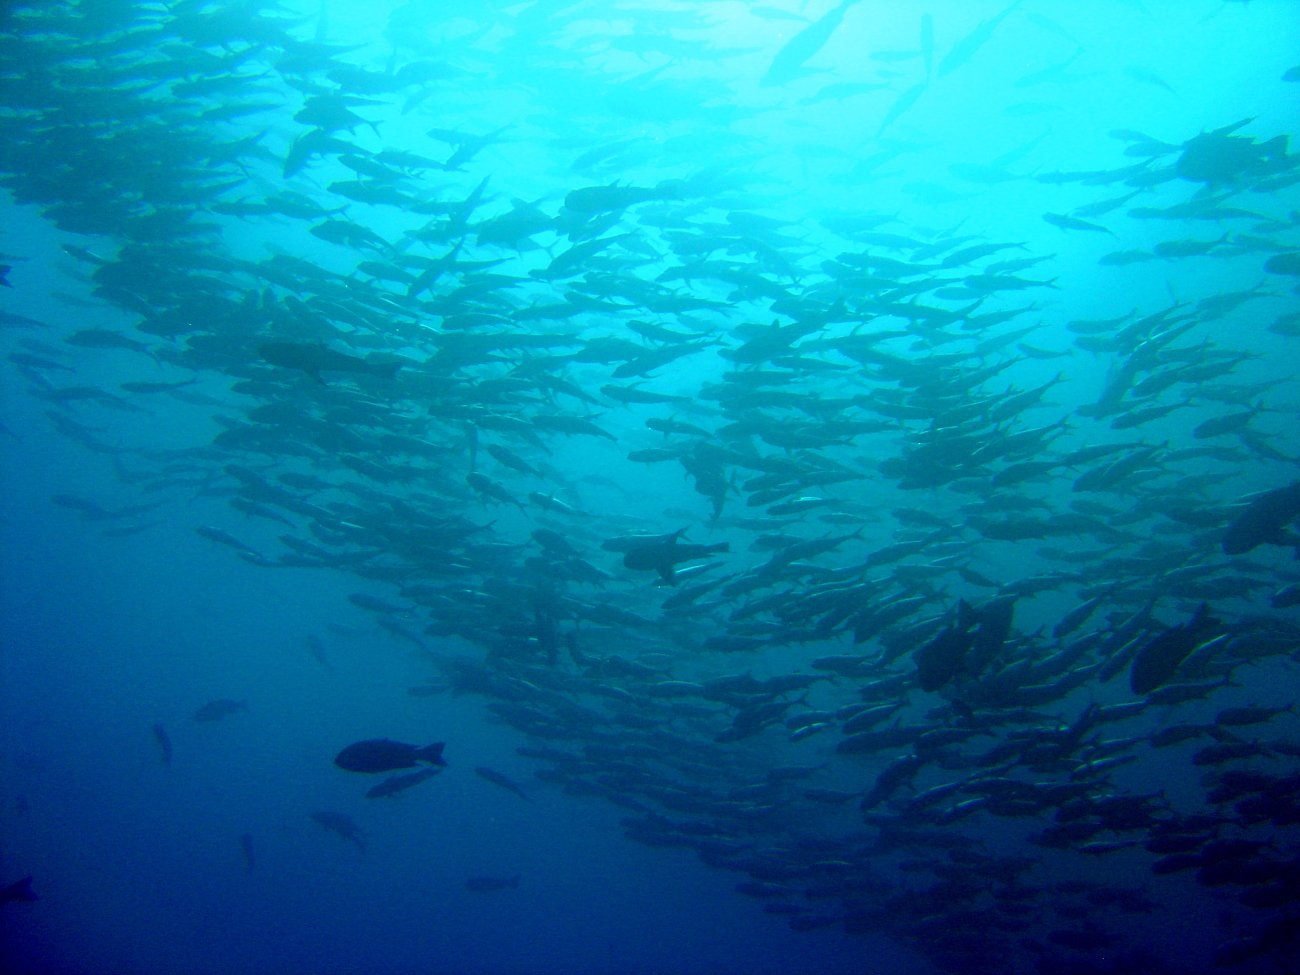 School of fish silhouetted in the sunlight